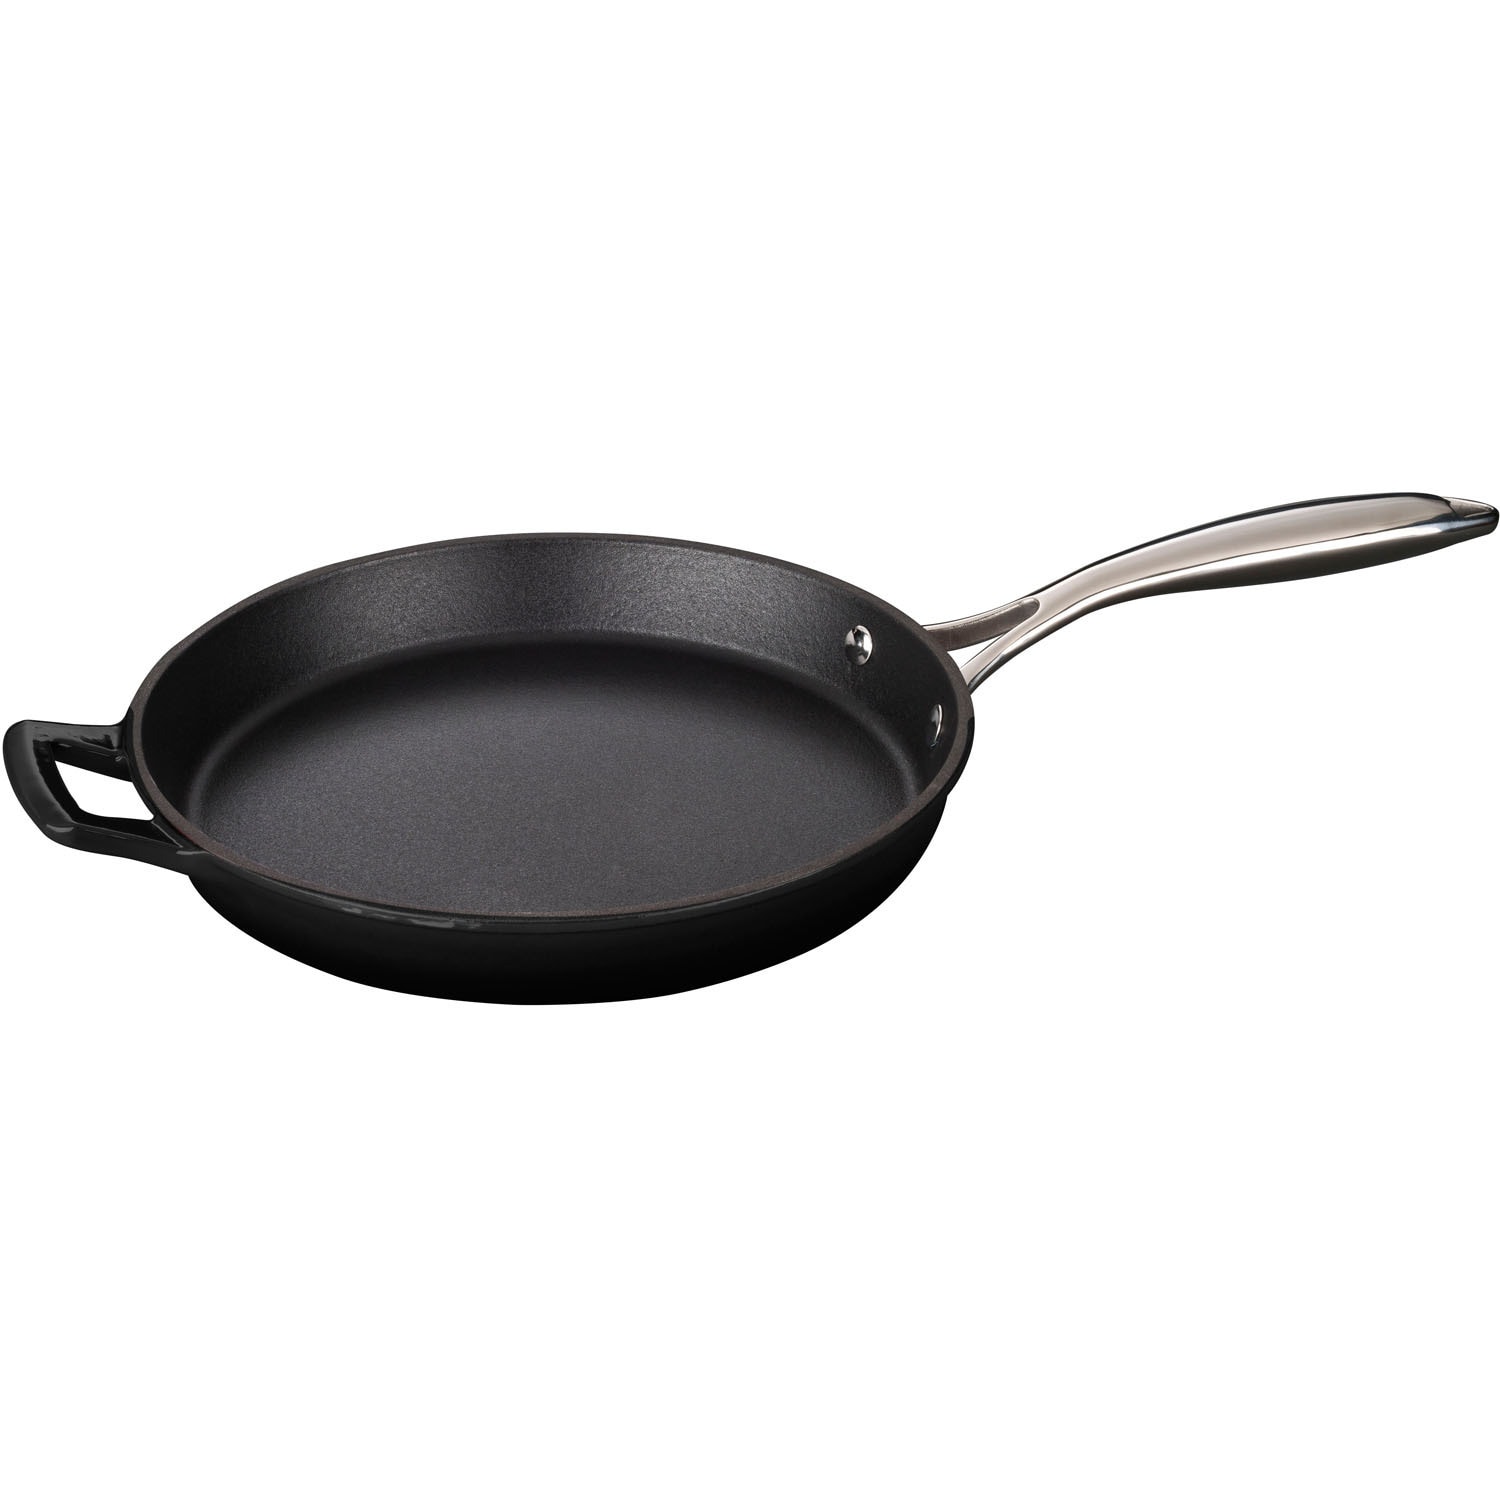 https://ak1.ostkcdn.com/images/products/12343554/La-Cuisine-Round-10-In.-Cast-Iron-Fry-Pan-with-Riveted-Stainless-Steel-Handle-and-Enamel-Finish-Black-e3a59e6f-a516-4721-b3b1-ff2aa3d5cf83.jpg